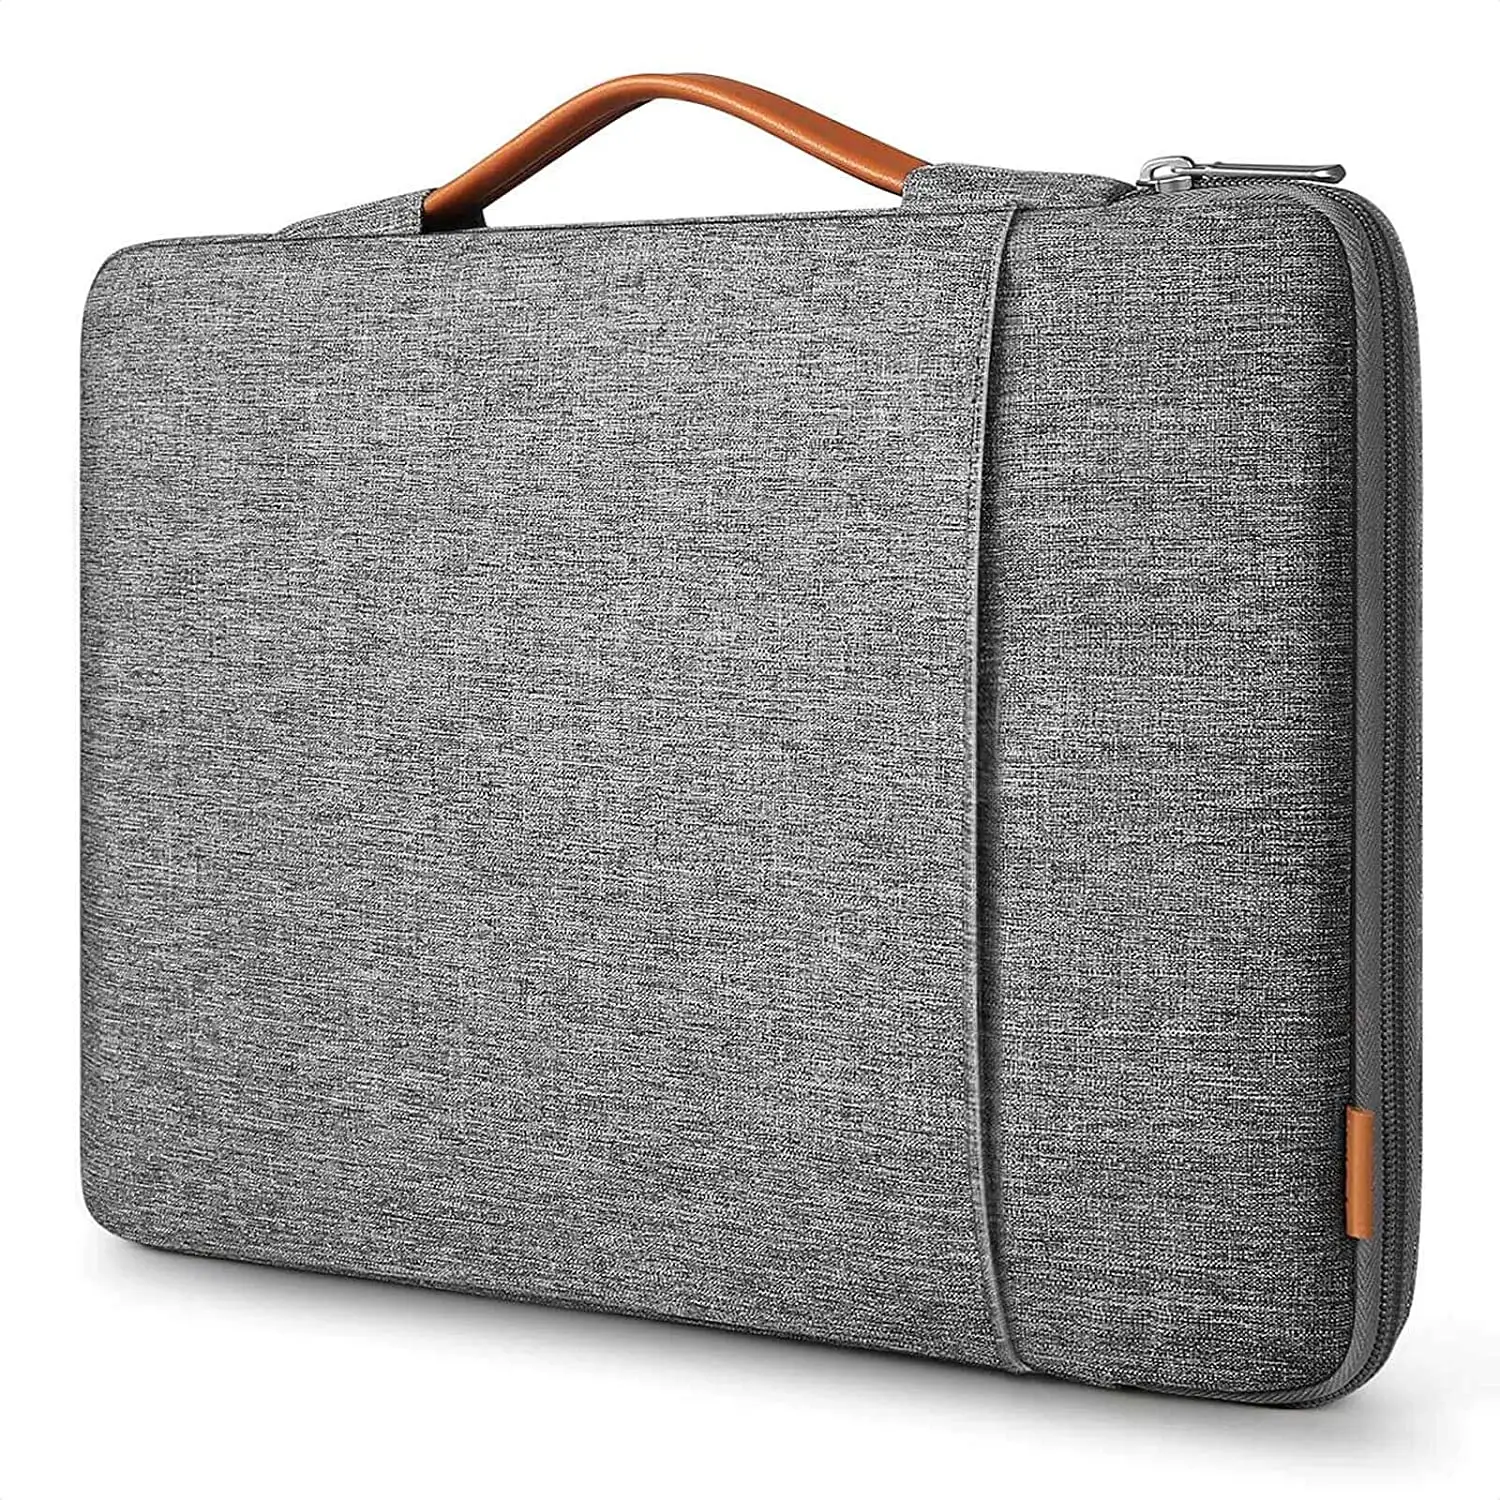 Protective Laptop Sleeve Carrying Case Bag